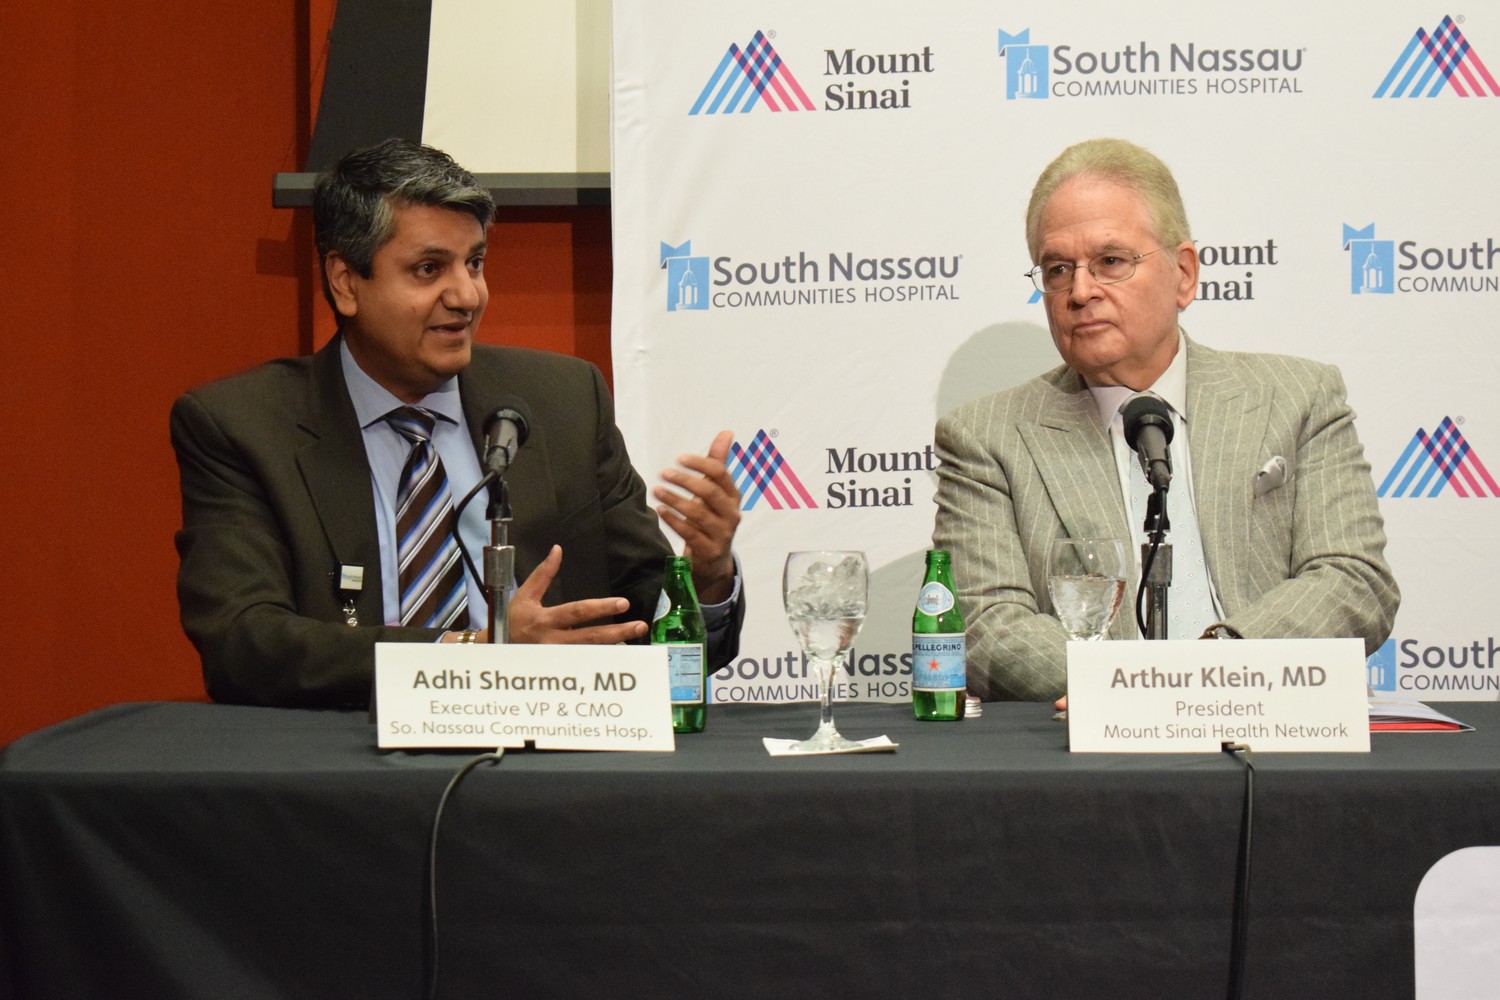 SNCH Vice President and Chief Medical Officer Adhi Sharma, left, and Mount Sinai President Dr. Arthur Klein each explained the long- and short-term goals of the partnership.